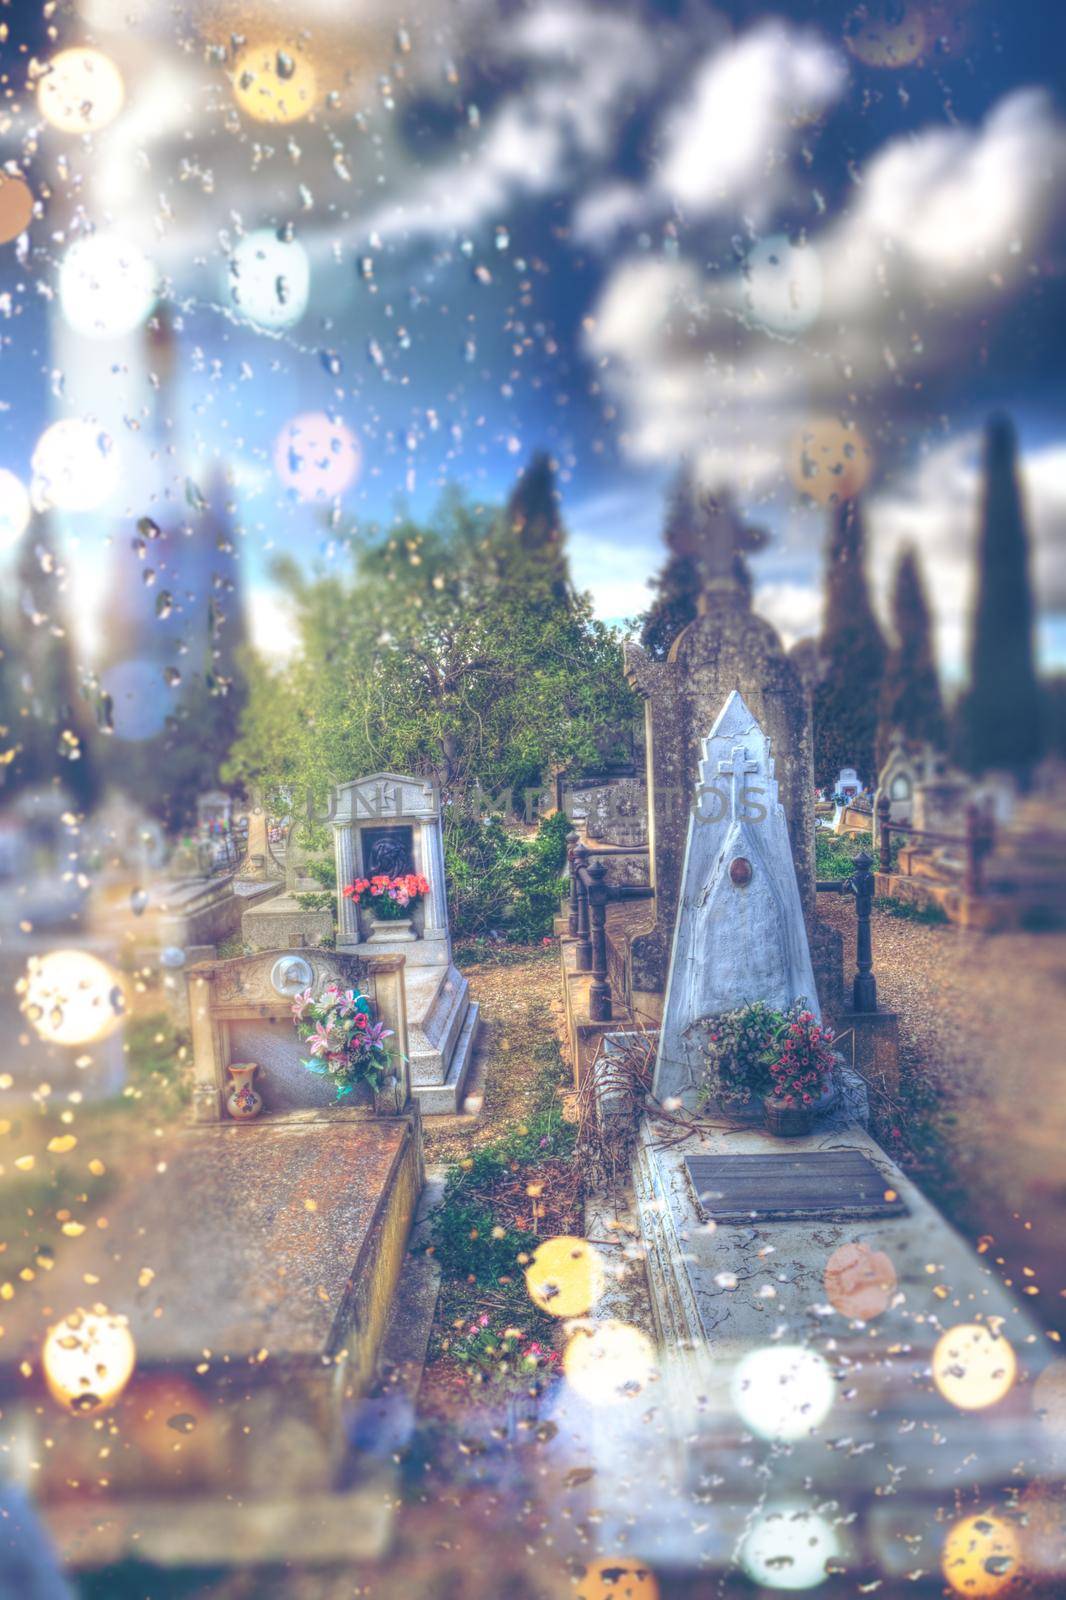 Abstract concept of death and passage of time with grave in the cemetery on rainy day